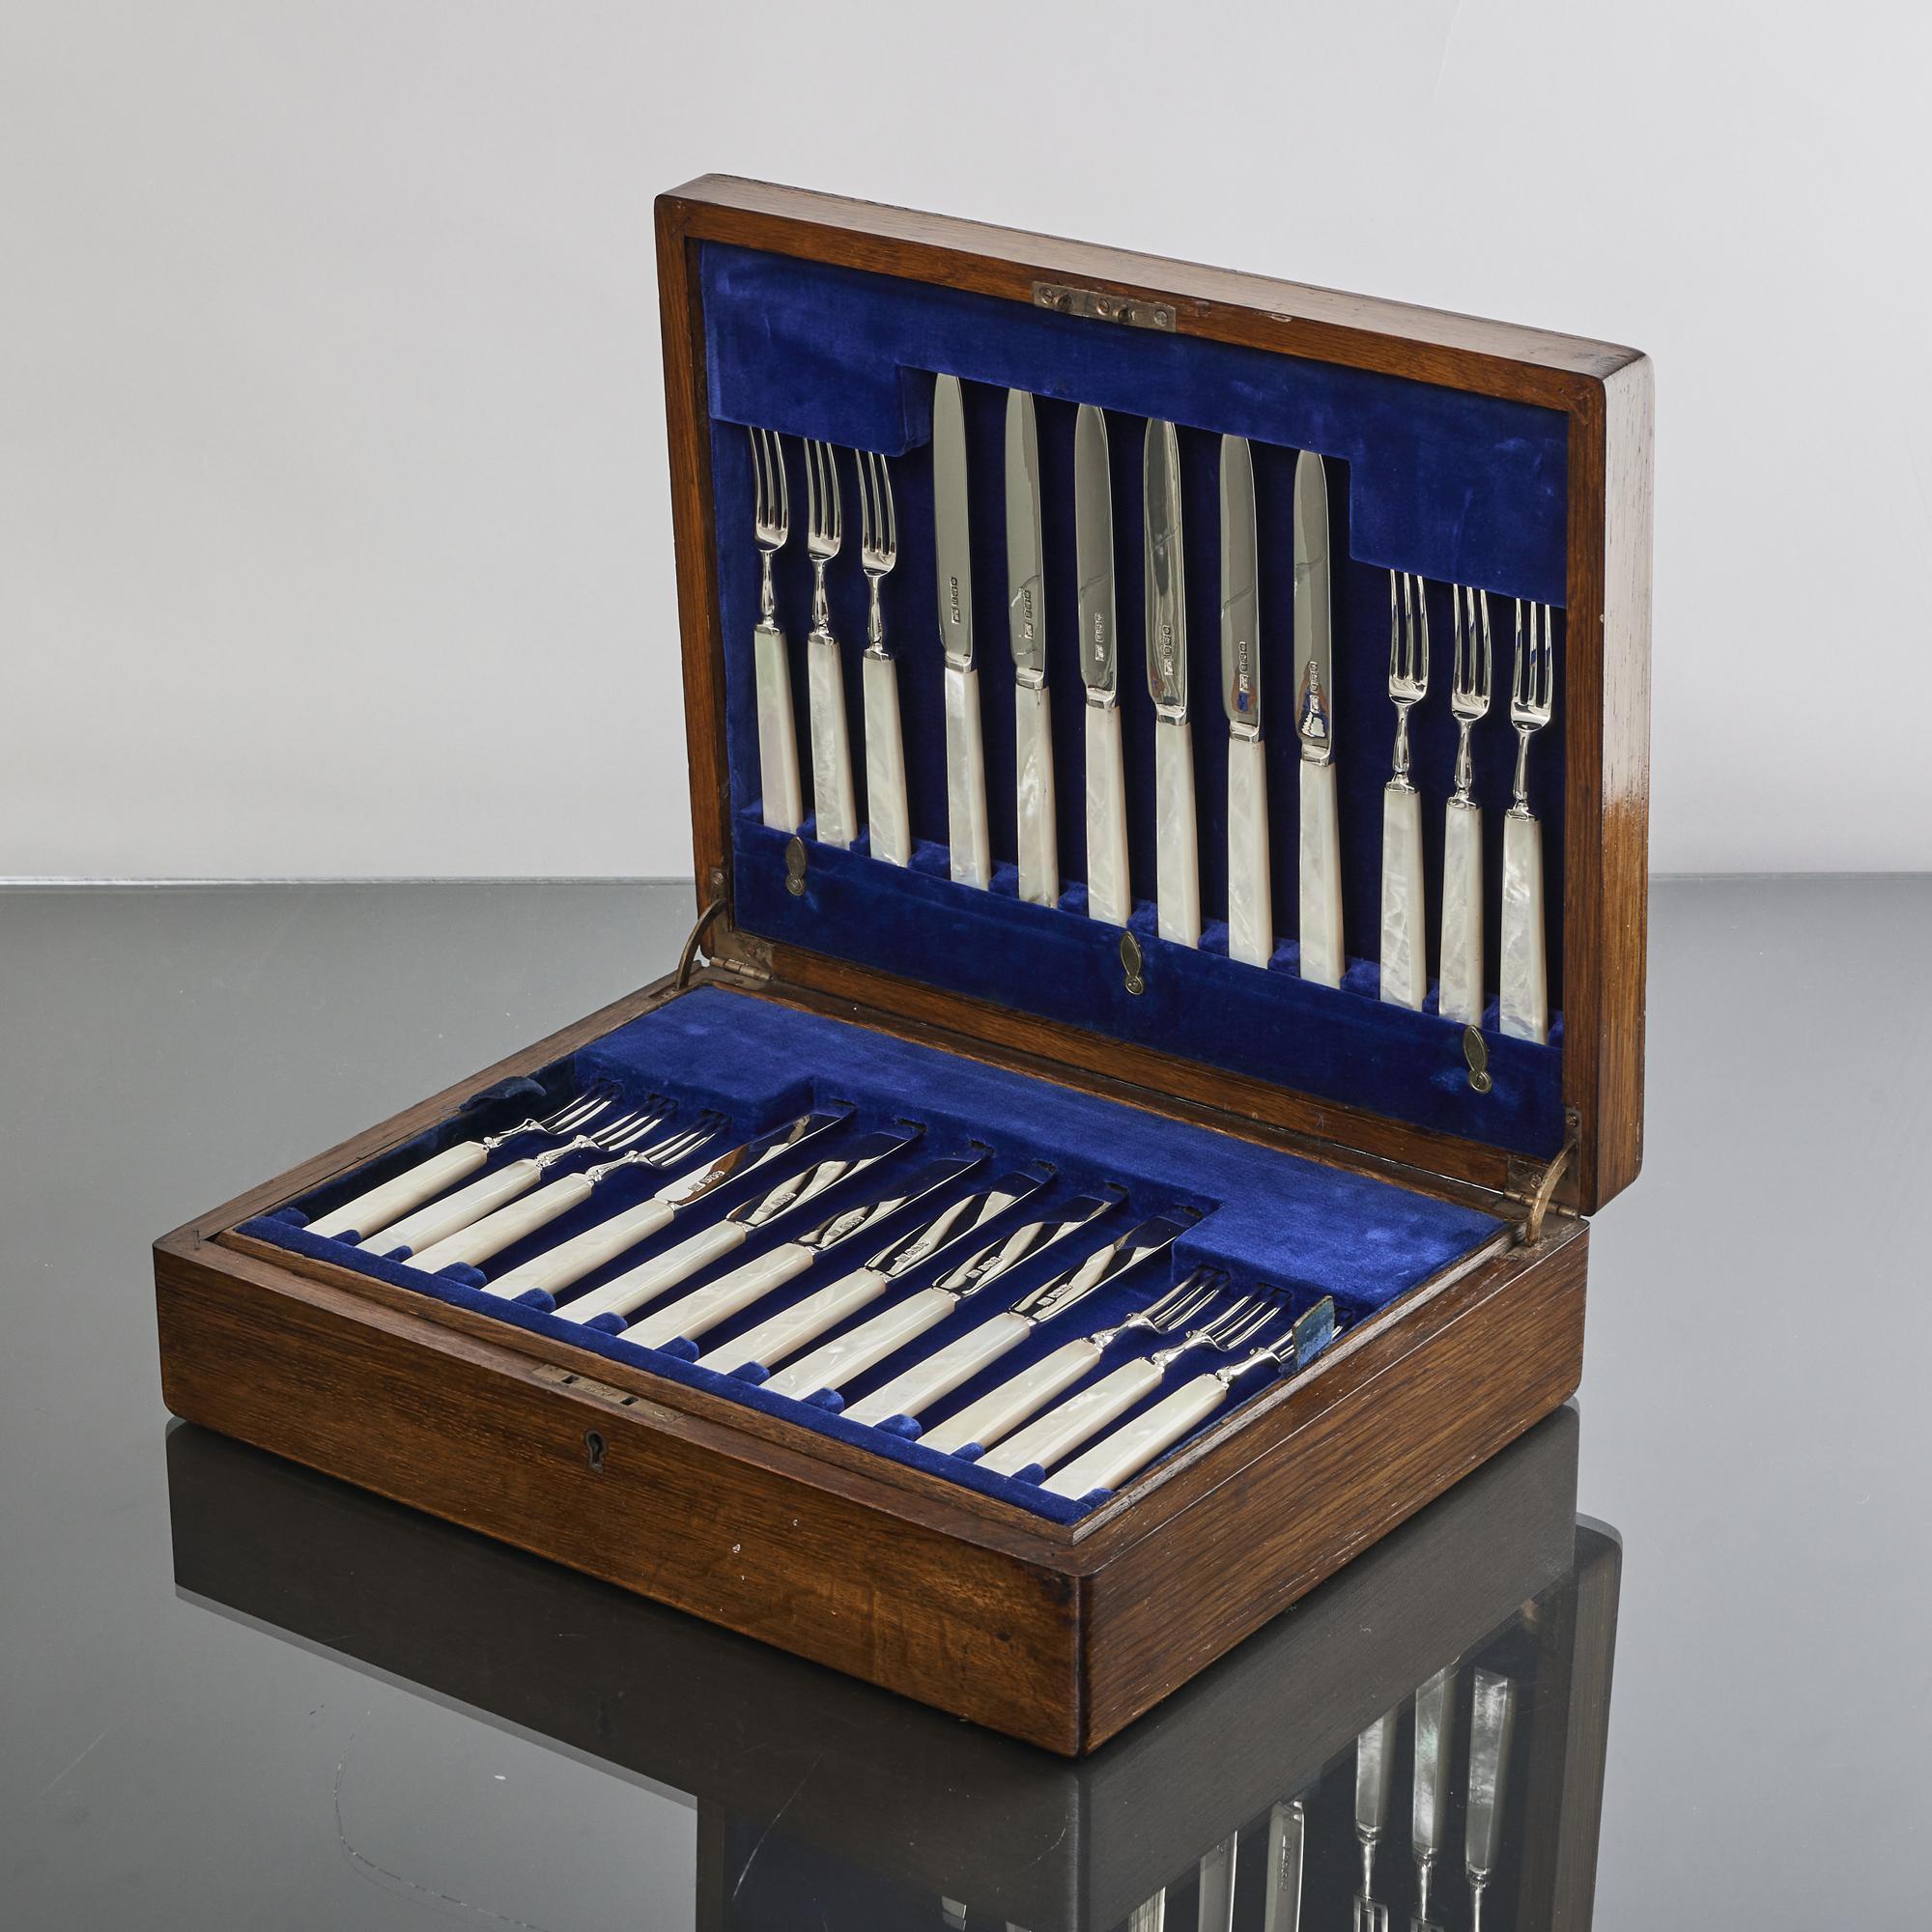 24 fruit or hors d'oeuvres knives and forks in their original wooden case. While the handles are mother-of-pearl, the blades and prongs are solid silver. A charming set of knives and forks in excellent condition.